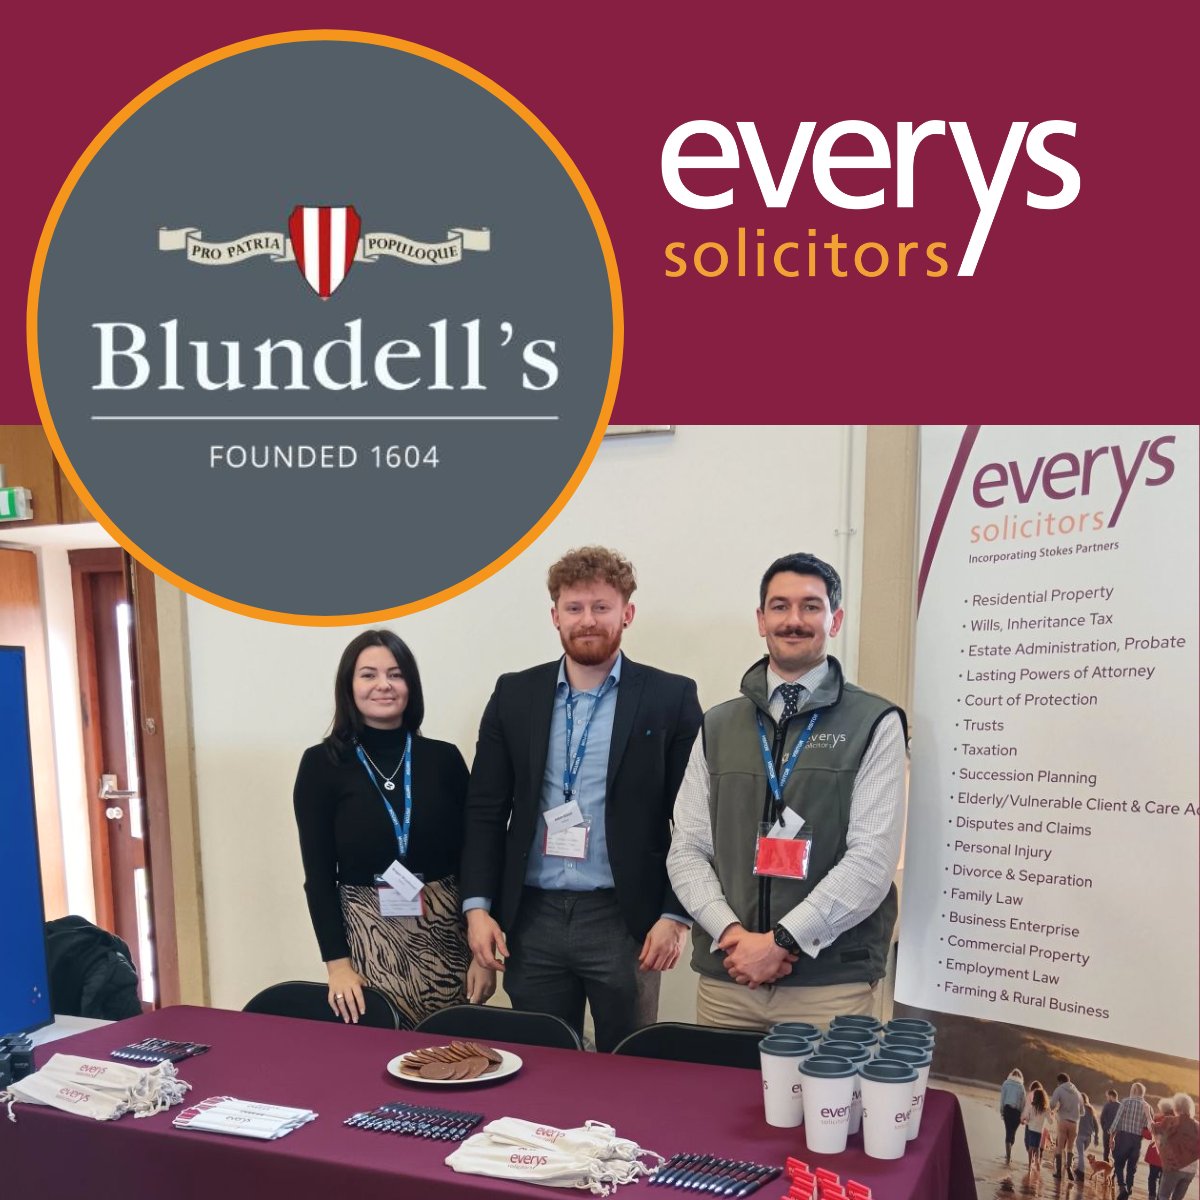 Last month, members of our team attended the @BlundellsSchool Careers & Higher Education Fair. It was a fantastic opportunity for us to share our expertise & career journey so far to ambitious students hoping to secure a career in law. ⚖️#WeAreEverys #CareersFair